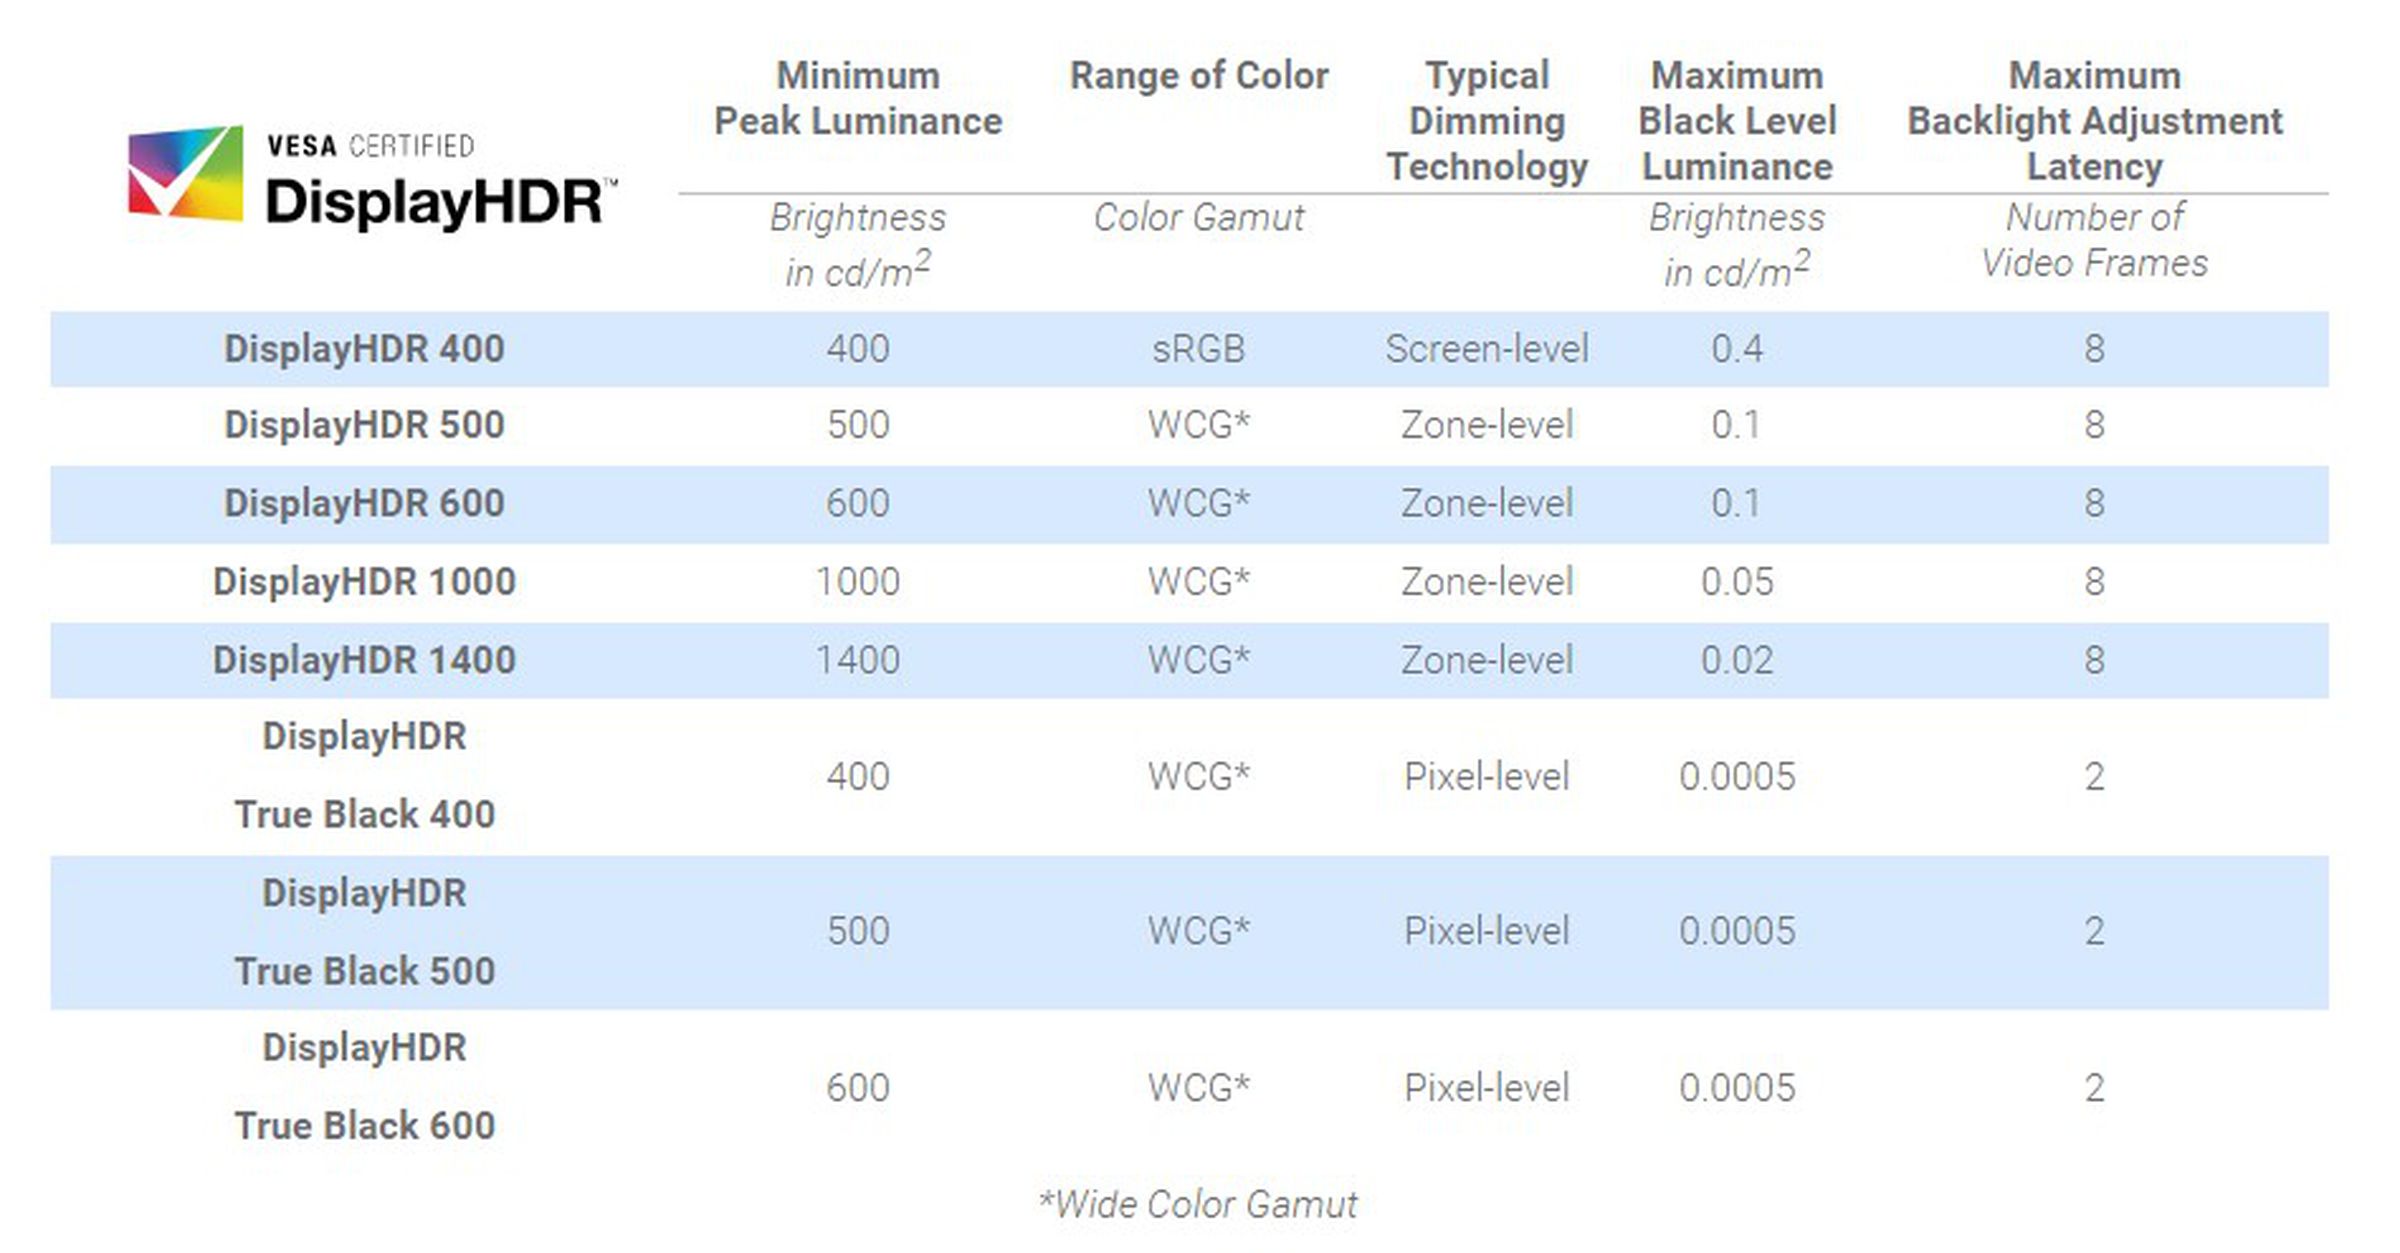 If you are looking for an HDR monitor, DisplayHDR certification labels could help, but know that “peak luminance” means “a tiny region on screen can get that bright,” and DisplayHDR 400 is barely HDR at all. 